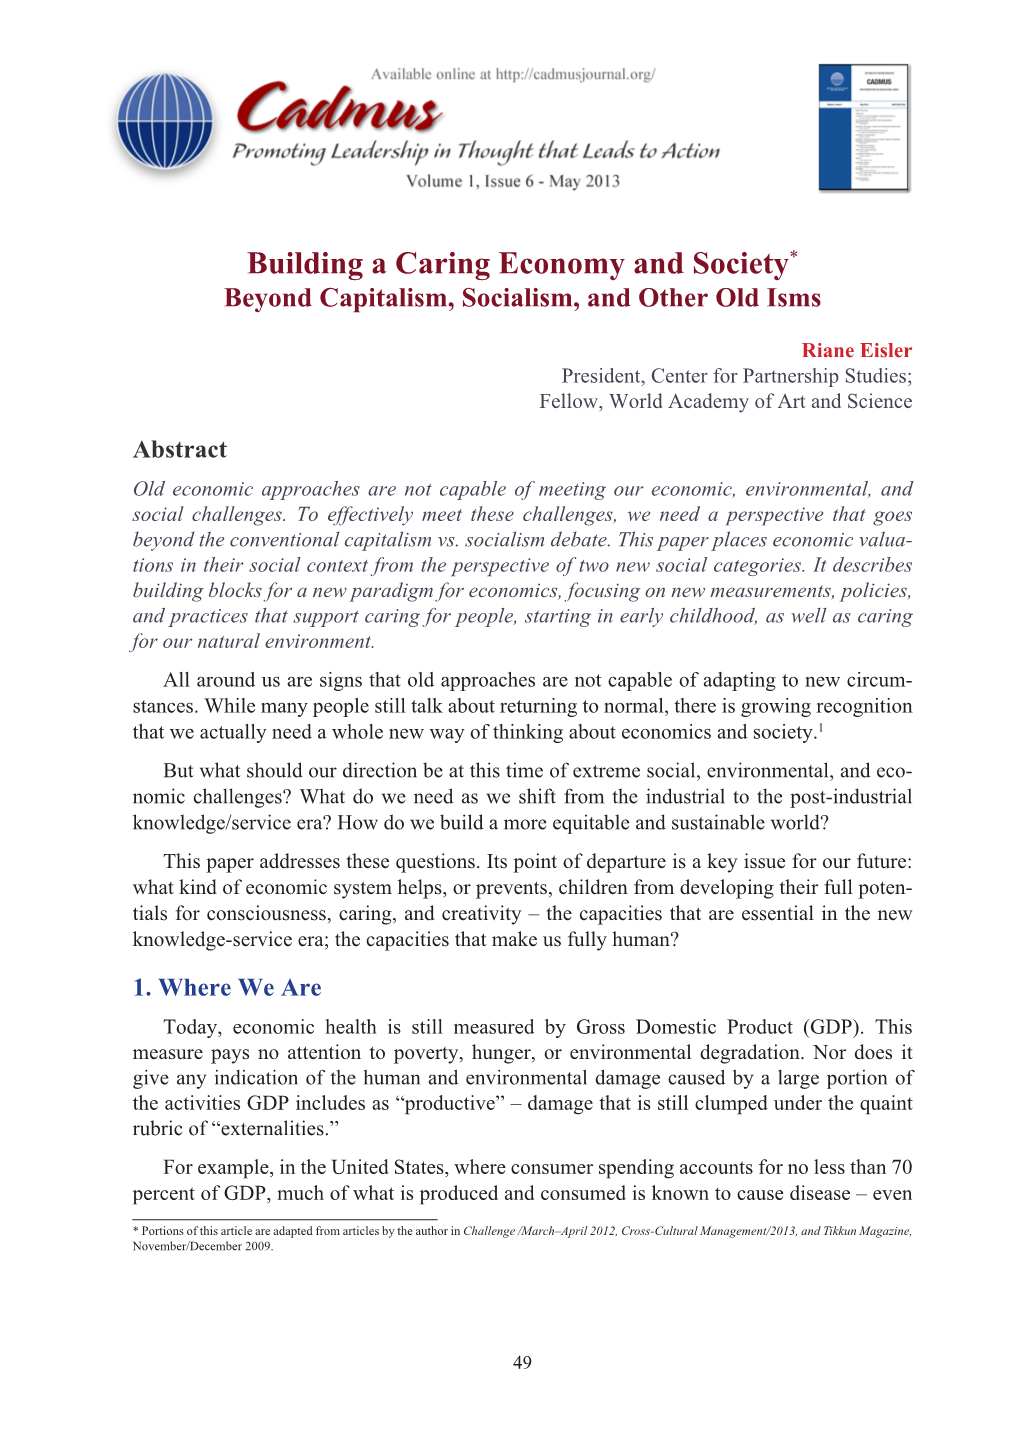 Building a Caring Economy and Society* Beyond Capitalism, Socialism, and Other Old Isms